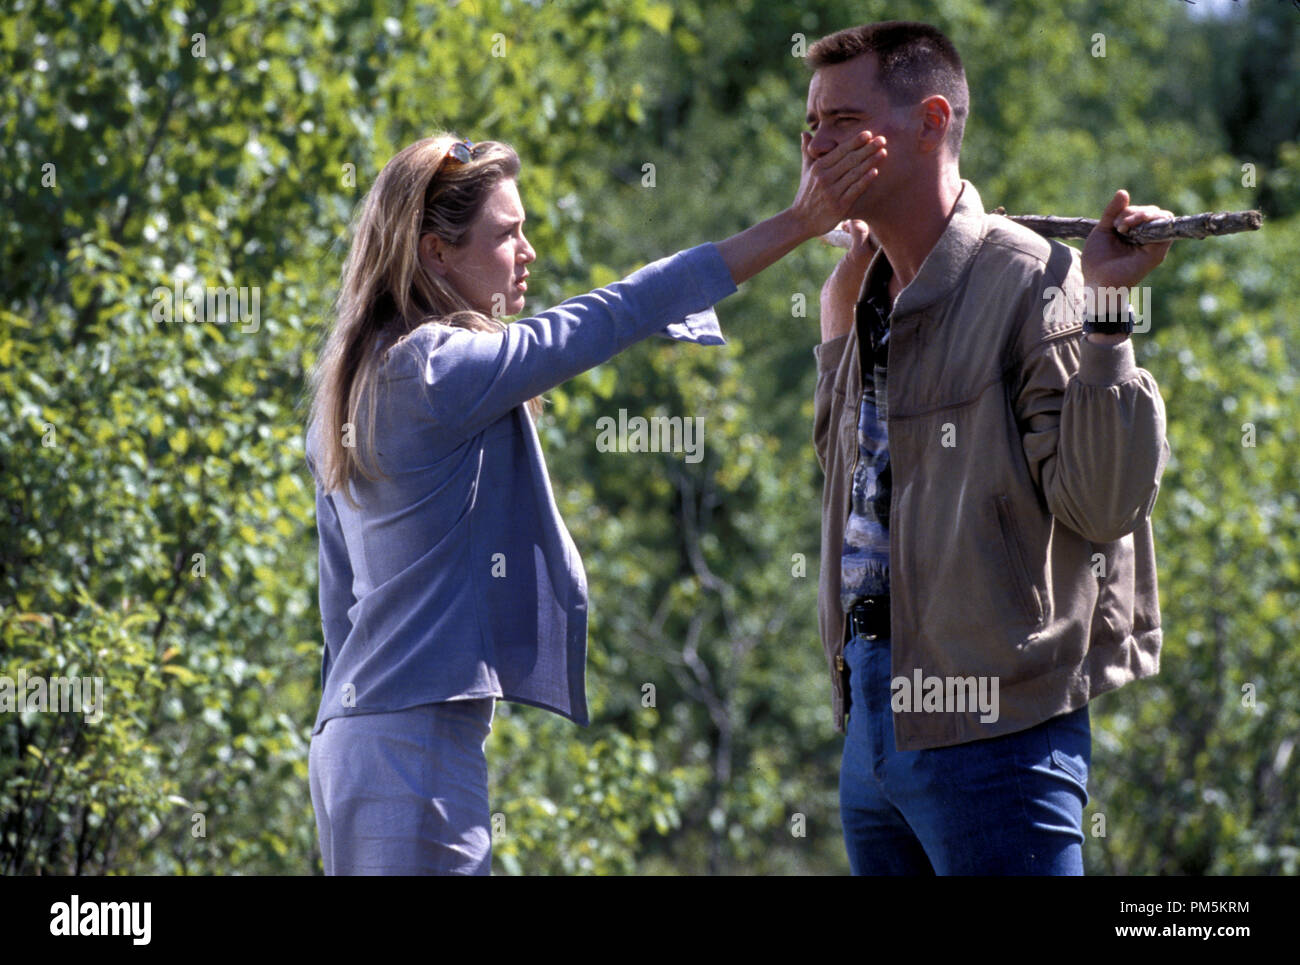 Film Still / Publicity Stills from 'Me, Myself and Irene' Jim Carrey, Renee Zellweger © 2000 20th Century Fox Photo Credit: Glenn Watson File Reference # 30846372THA  For Editorial Use Only -  All Rights Reserved Stock Photo